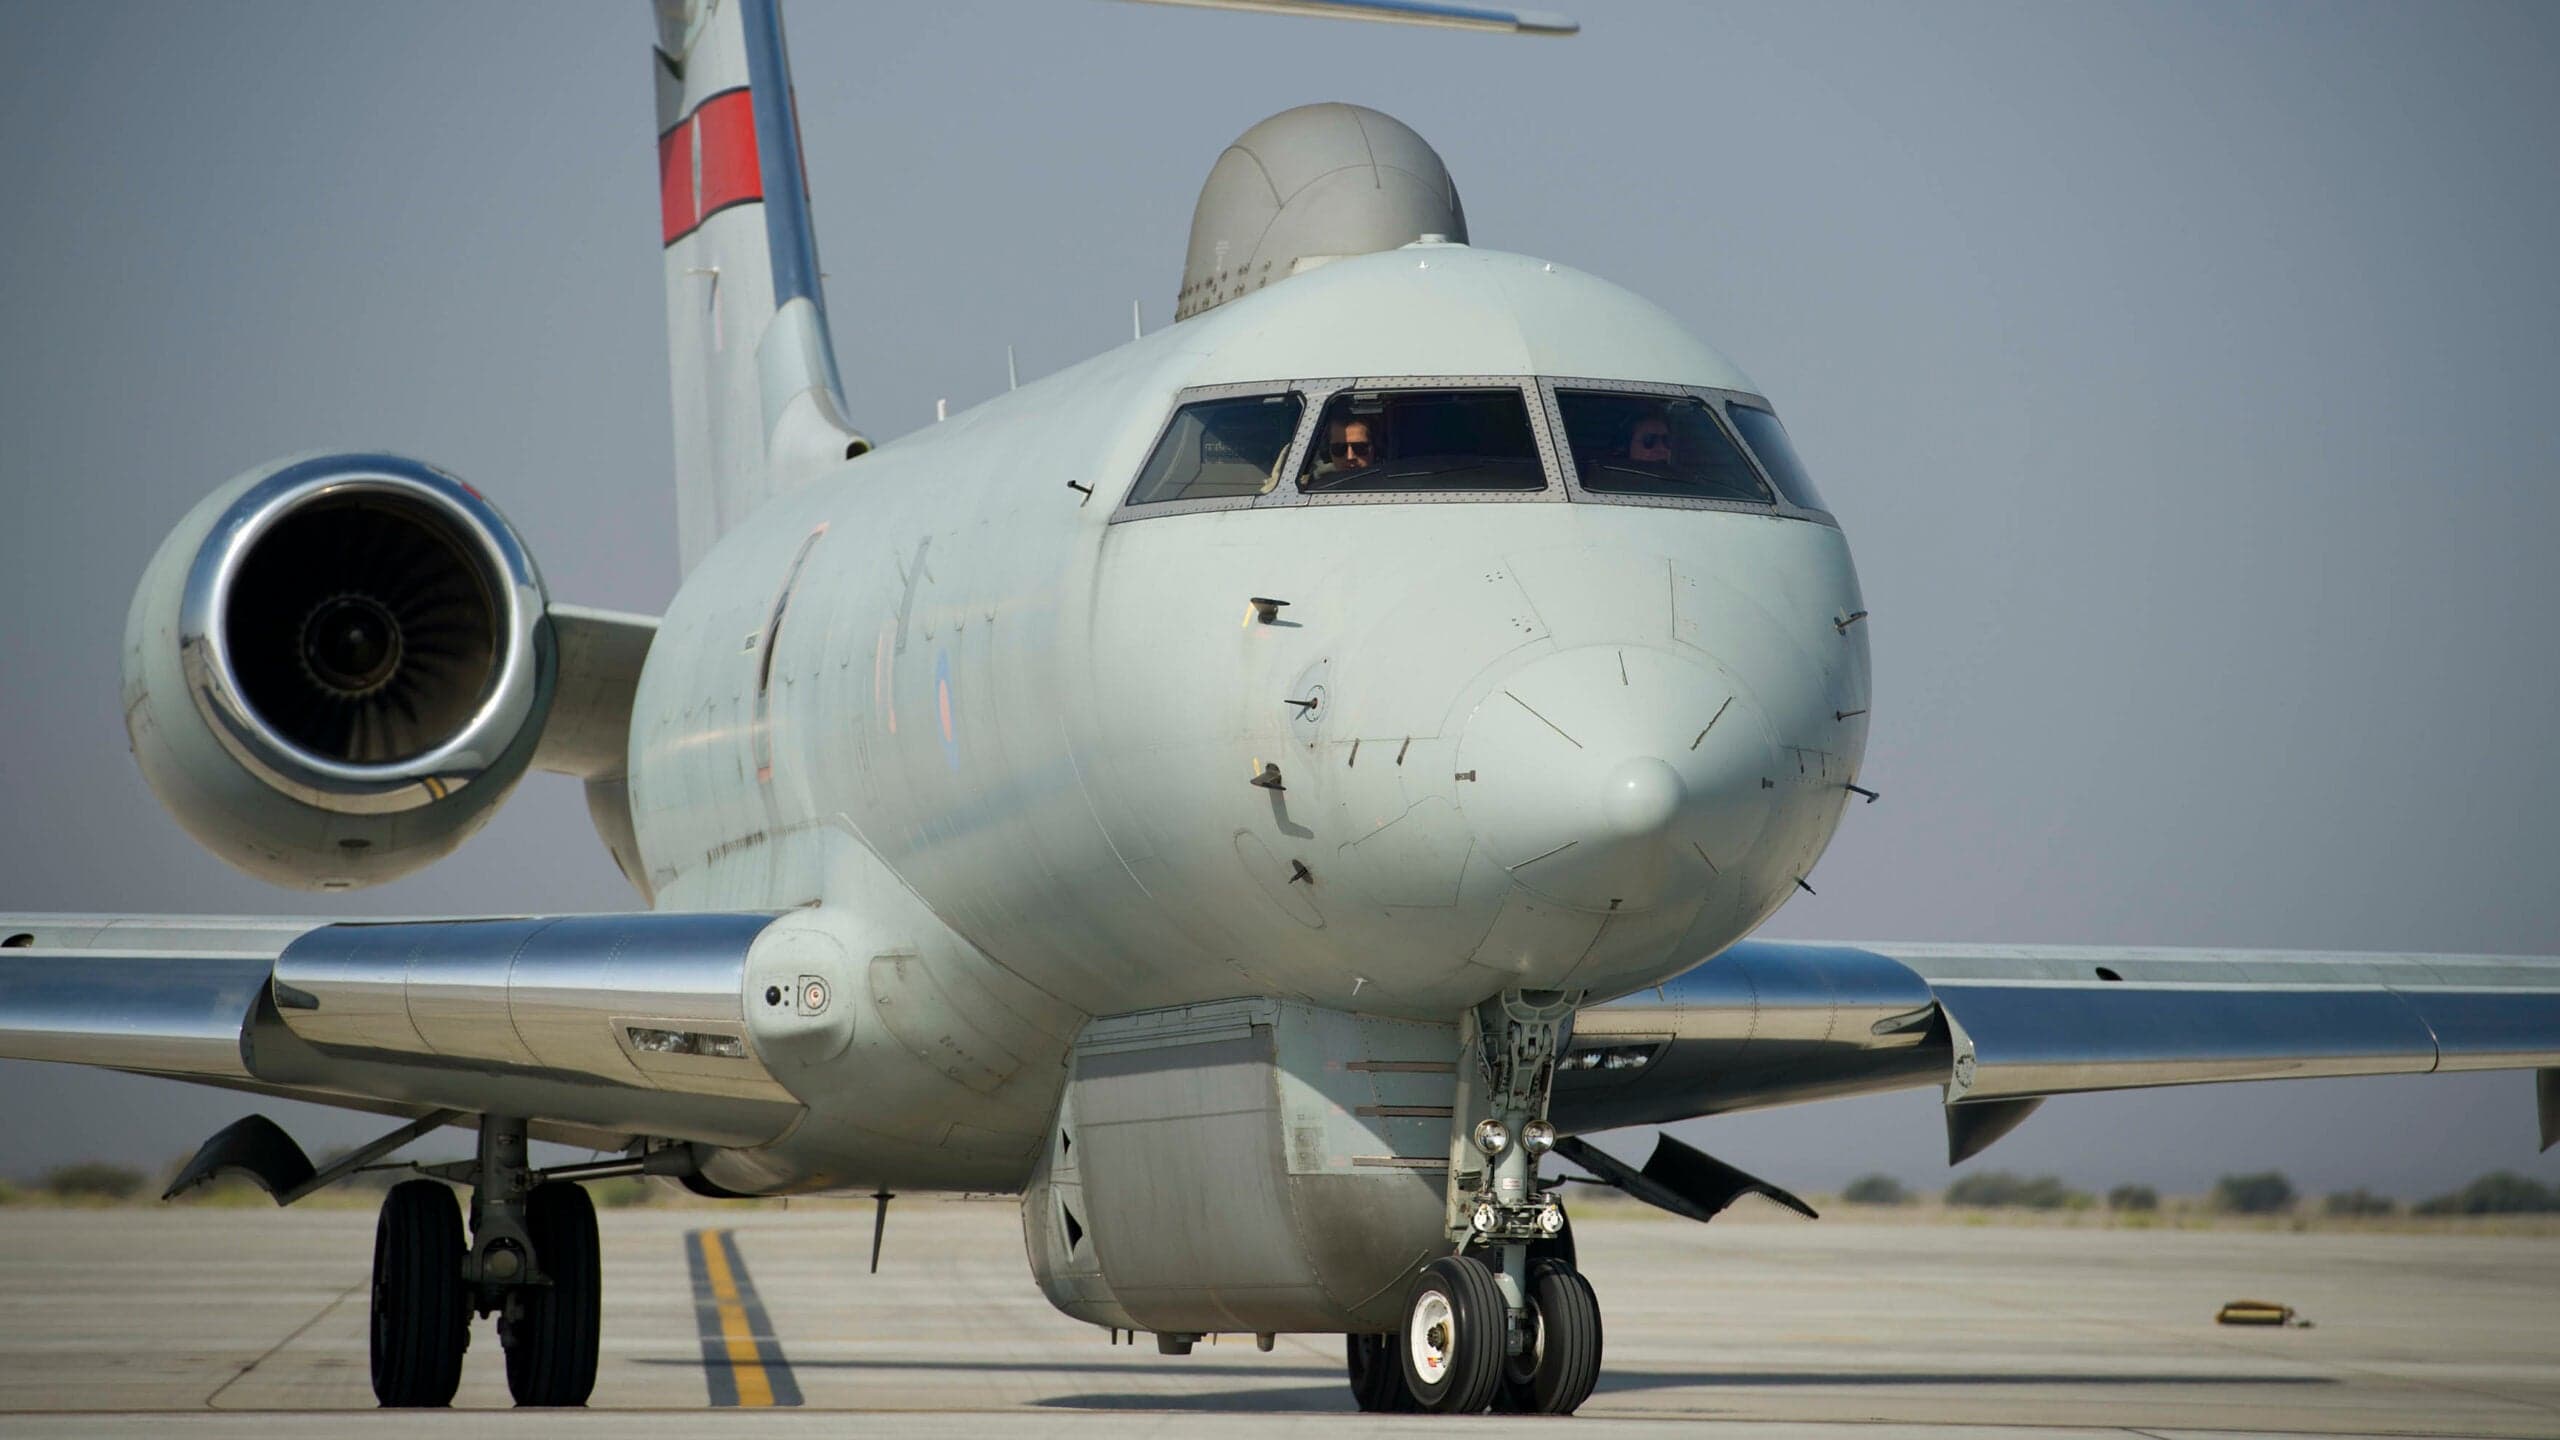 You Can Buy The Royal Air Force’s Impressive Sentinel Radar Planes, But Only In Pieces